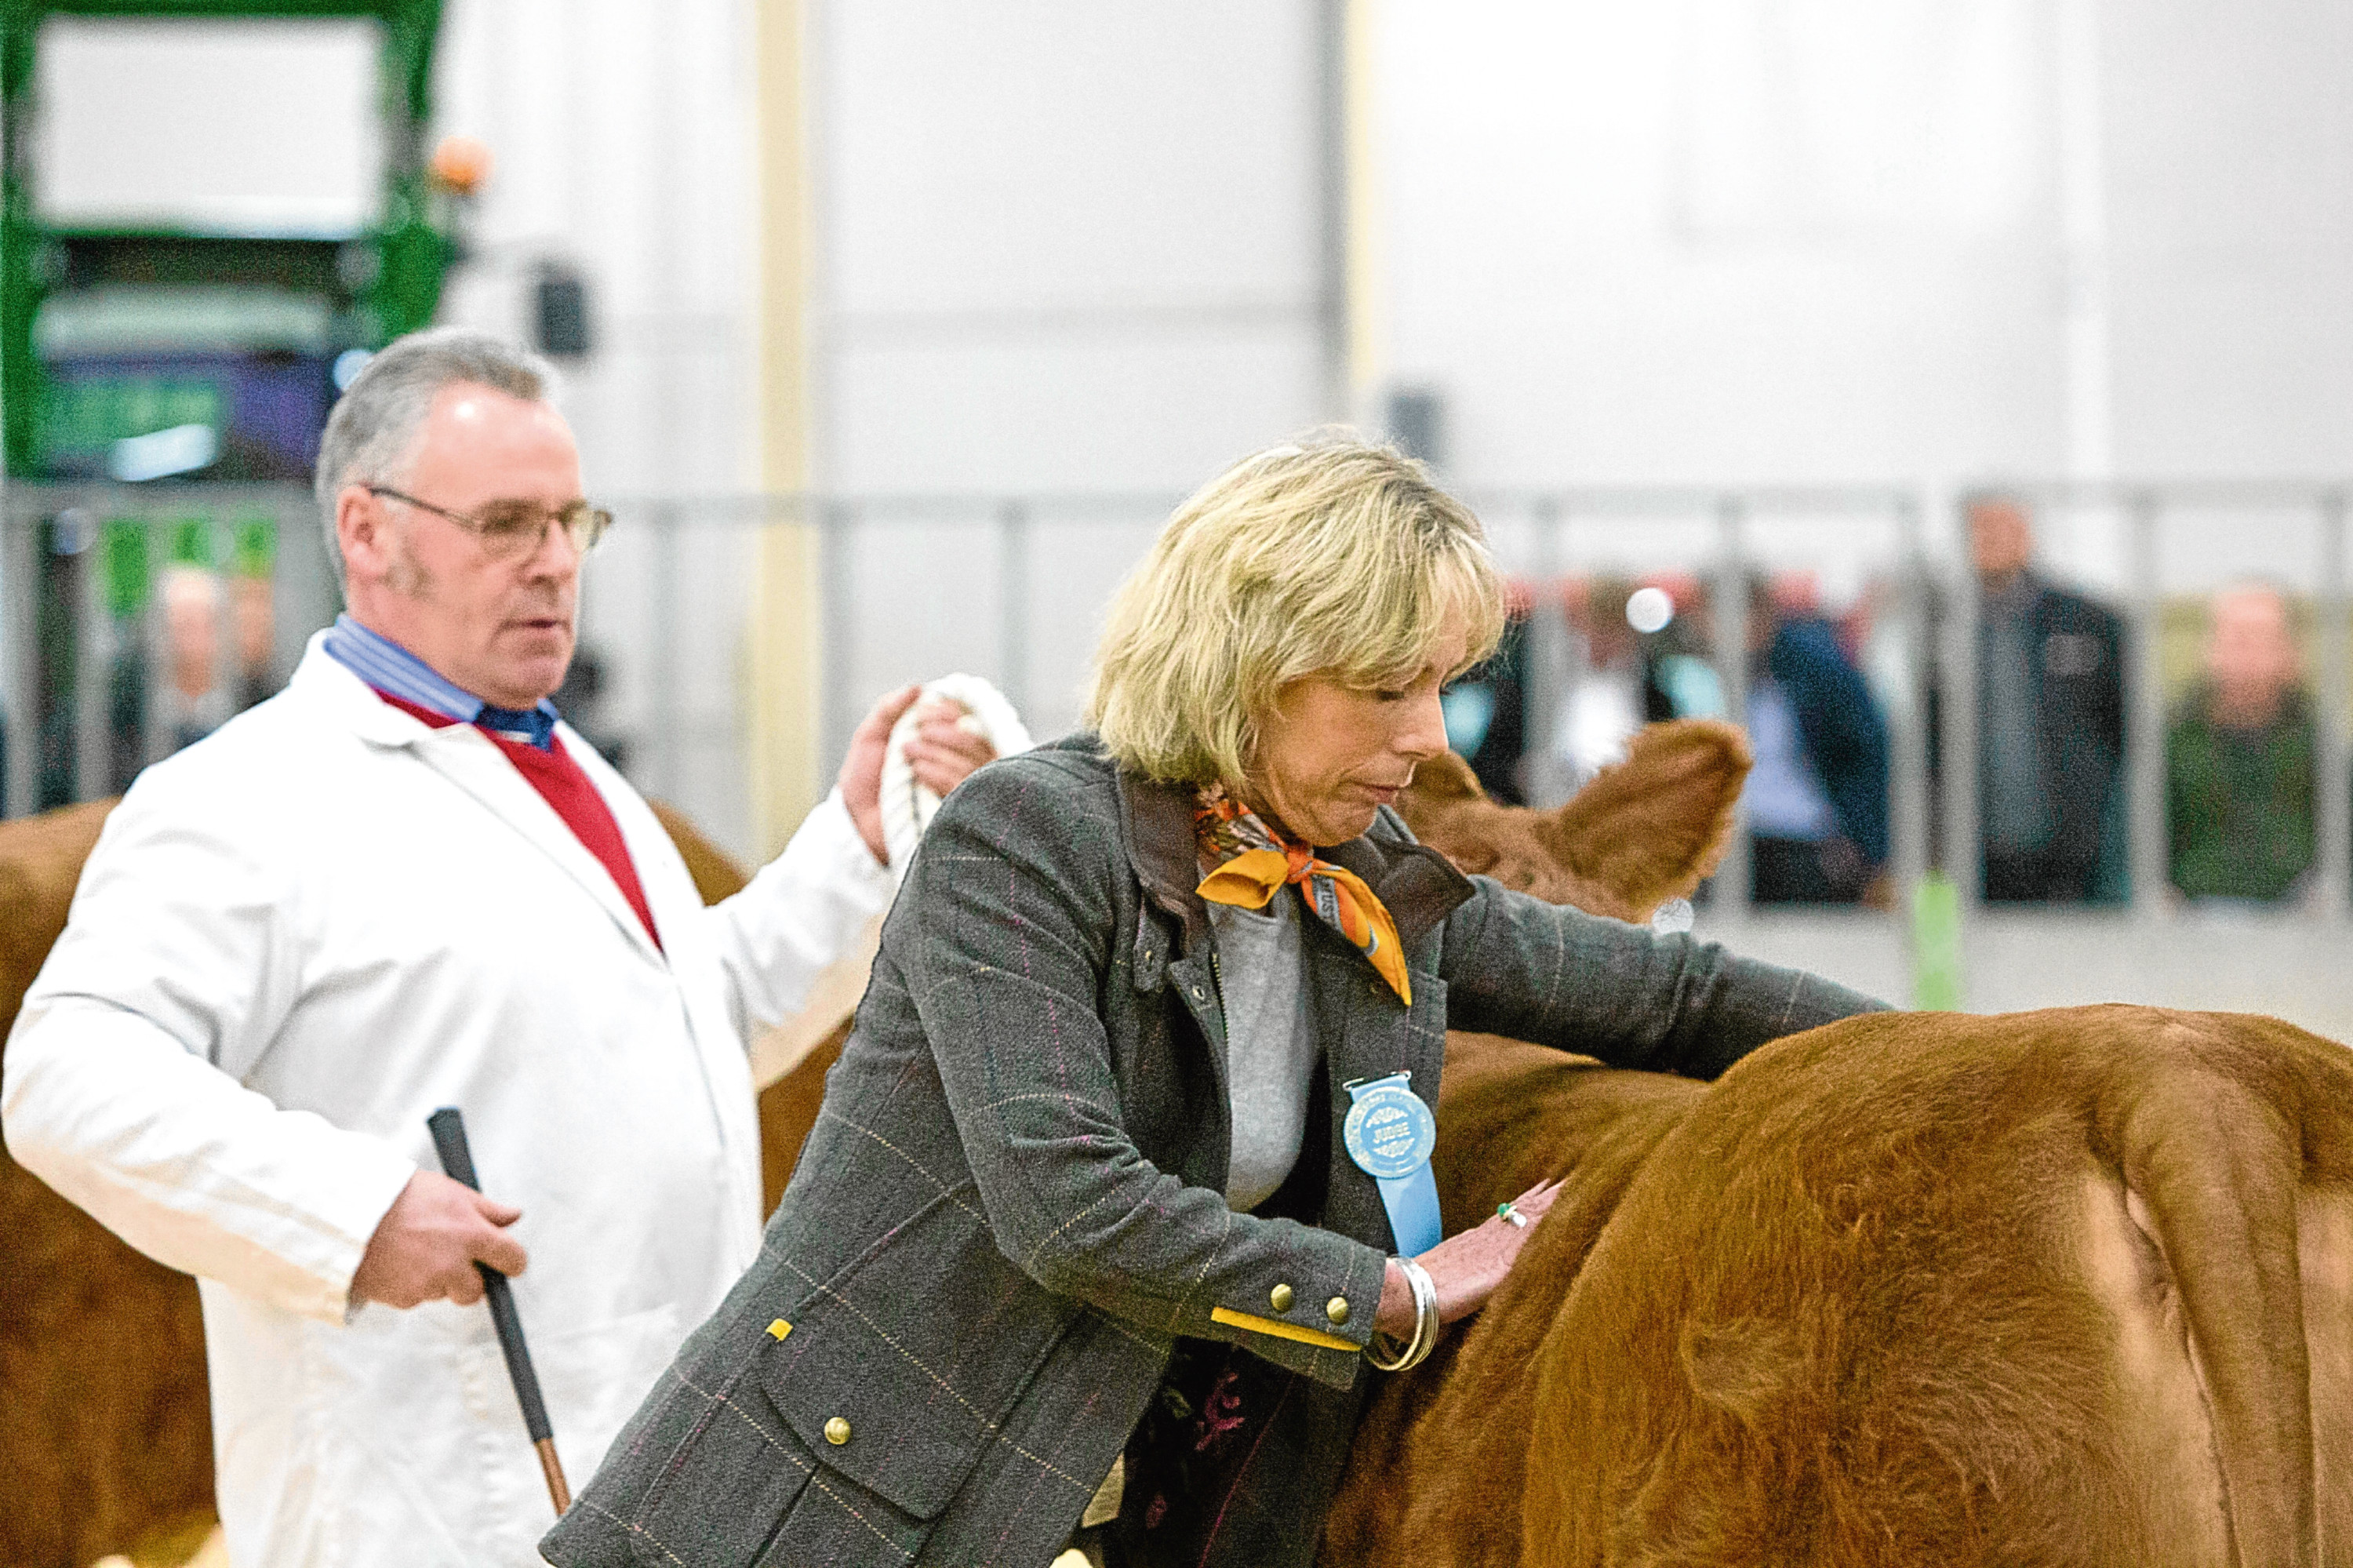 Butcher Louise Forsyth judging an entry from Wilson Peters at last year's event.